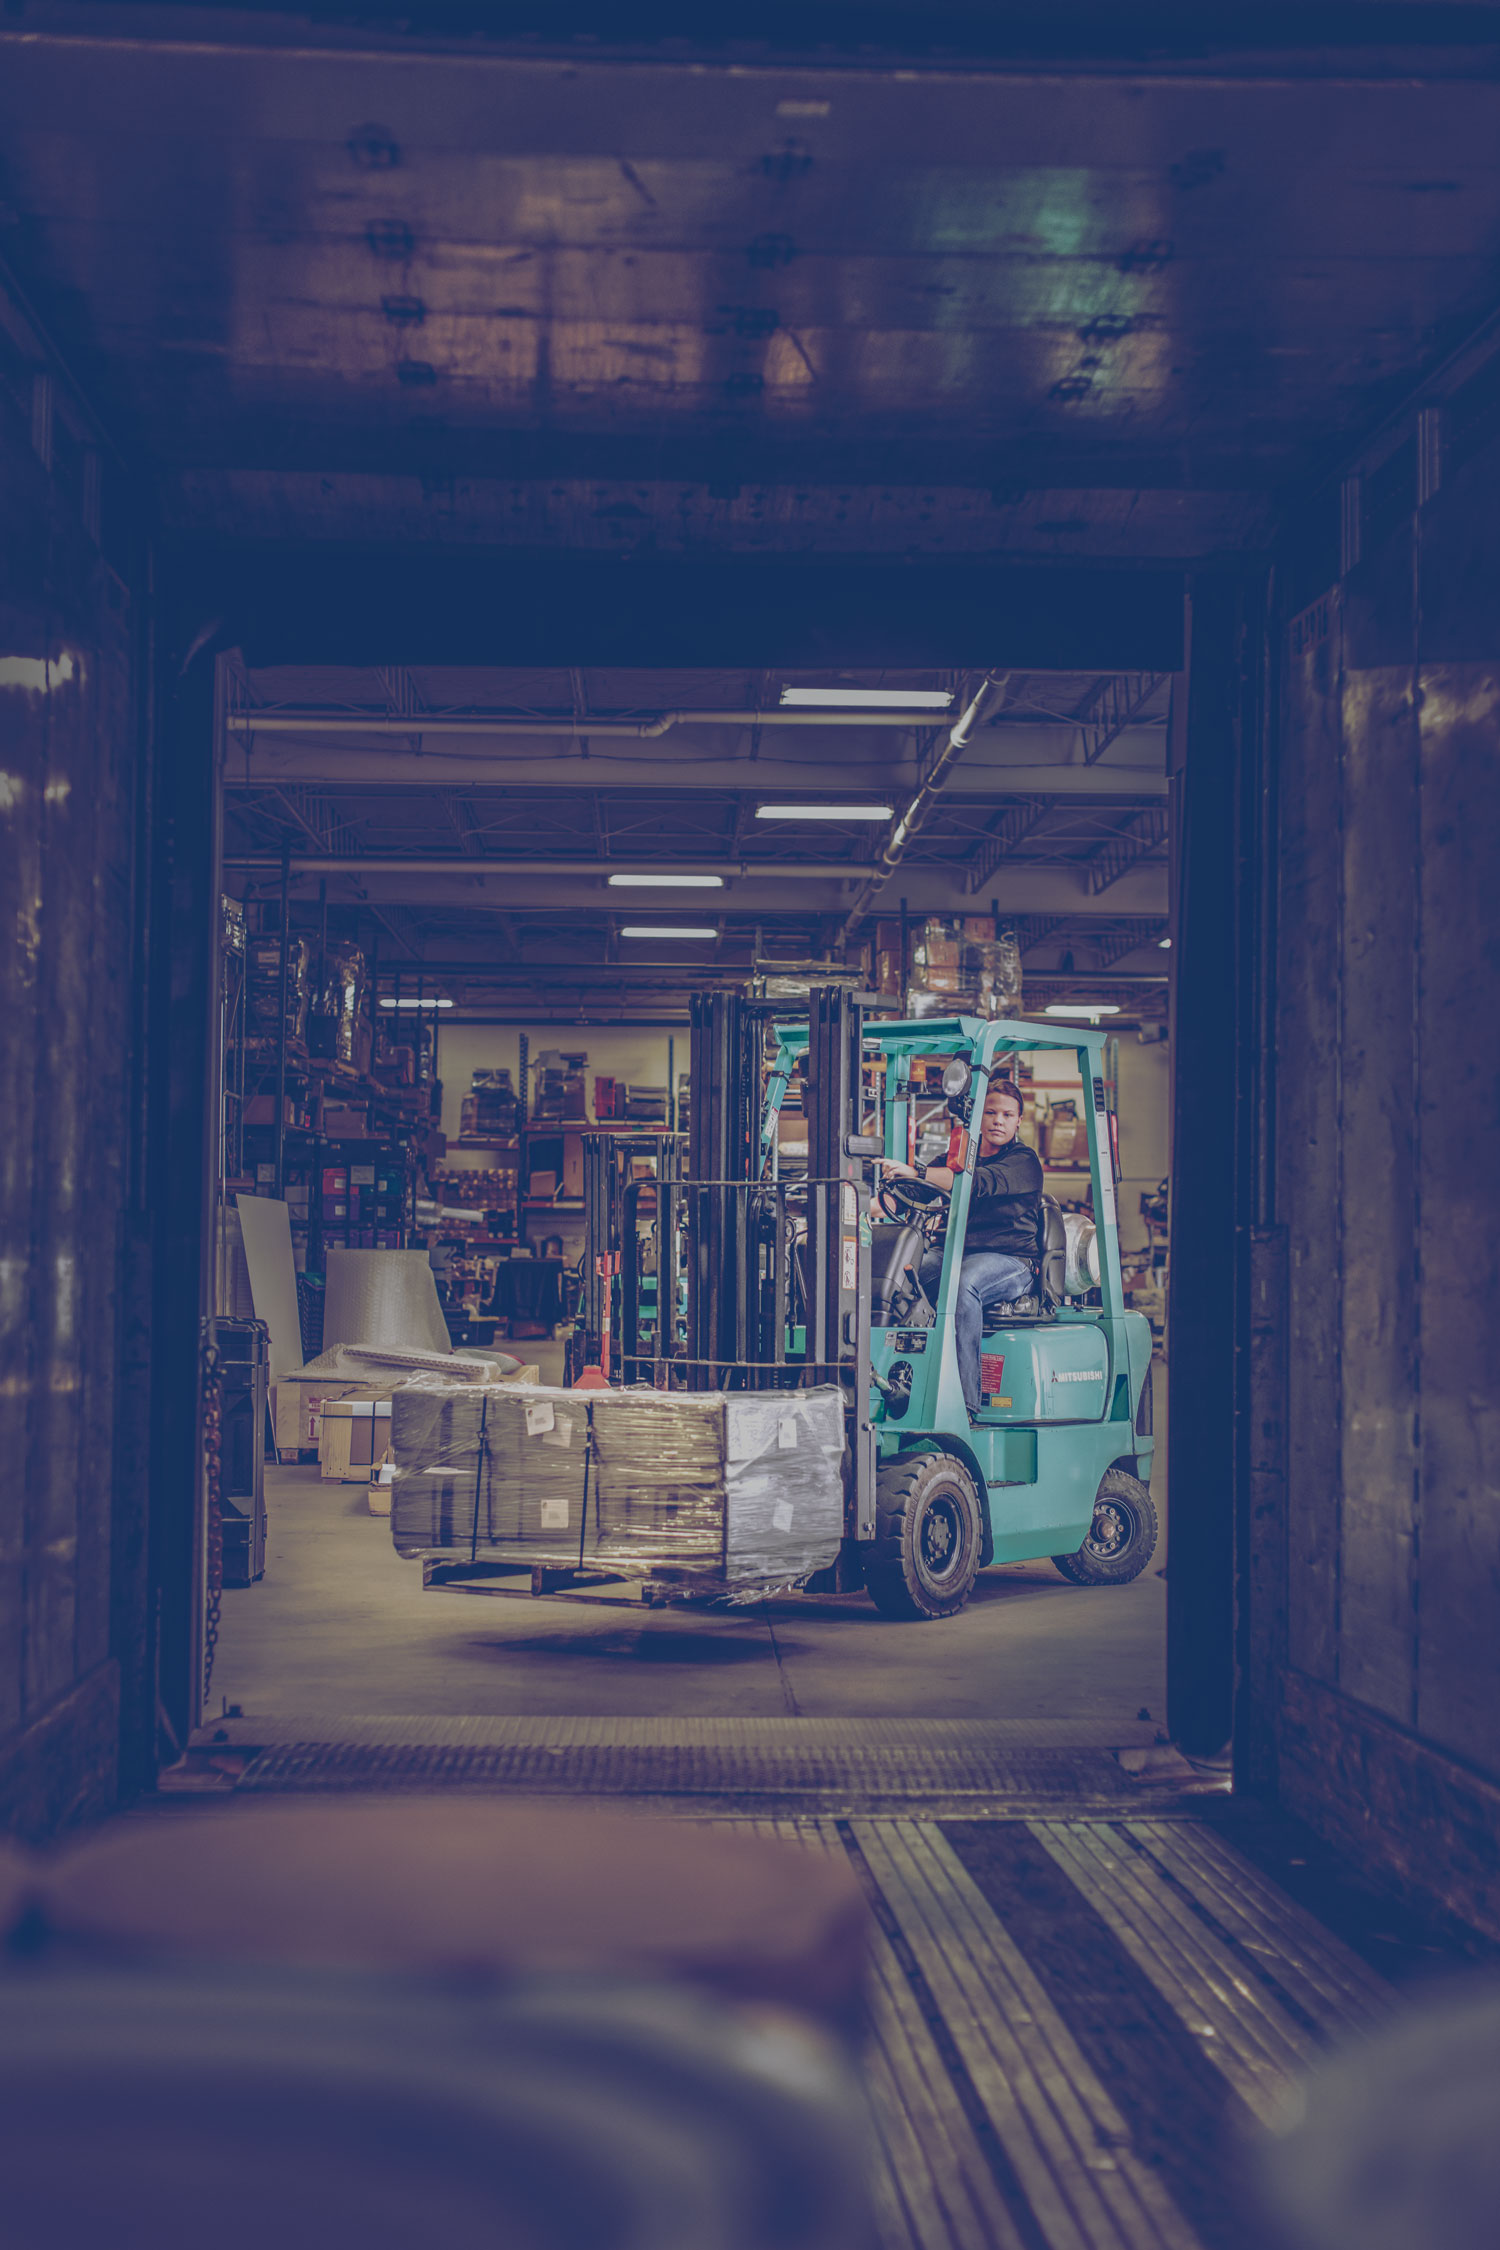 A propane-powered forklift in a warehouse filling a trailer with a pallet of goods.